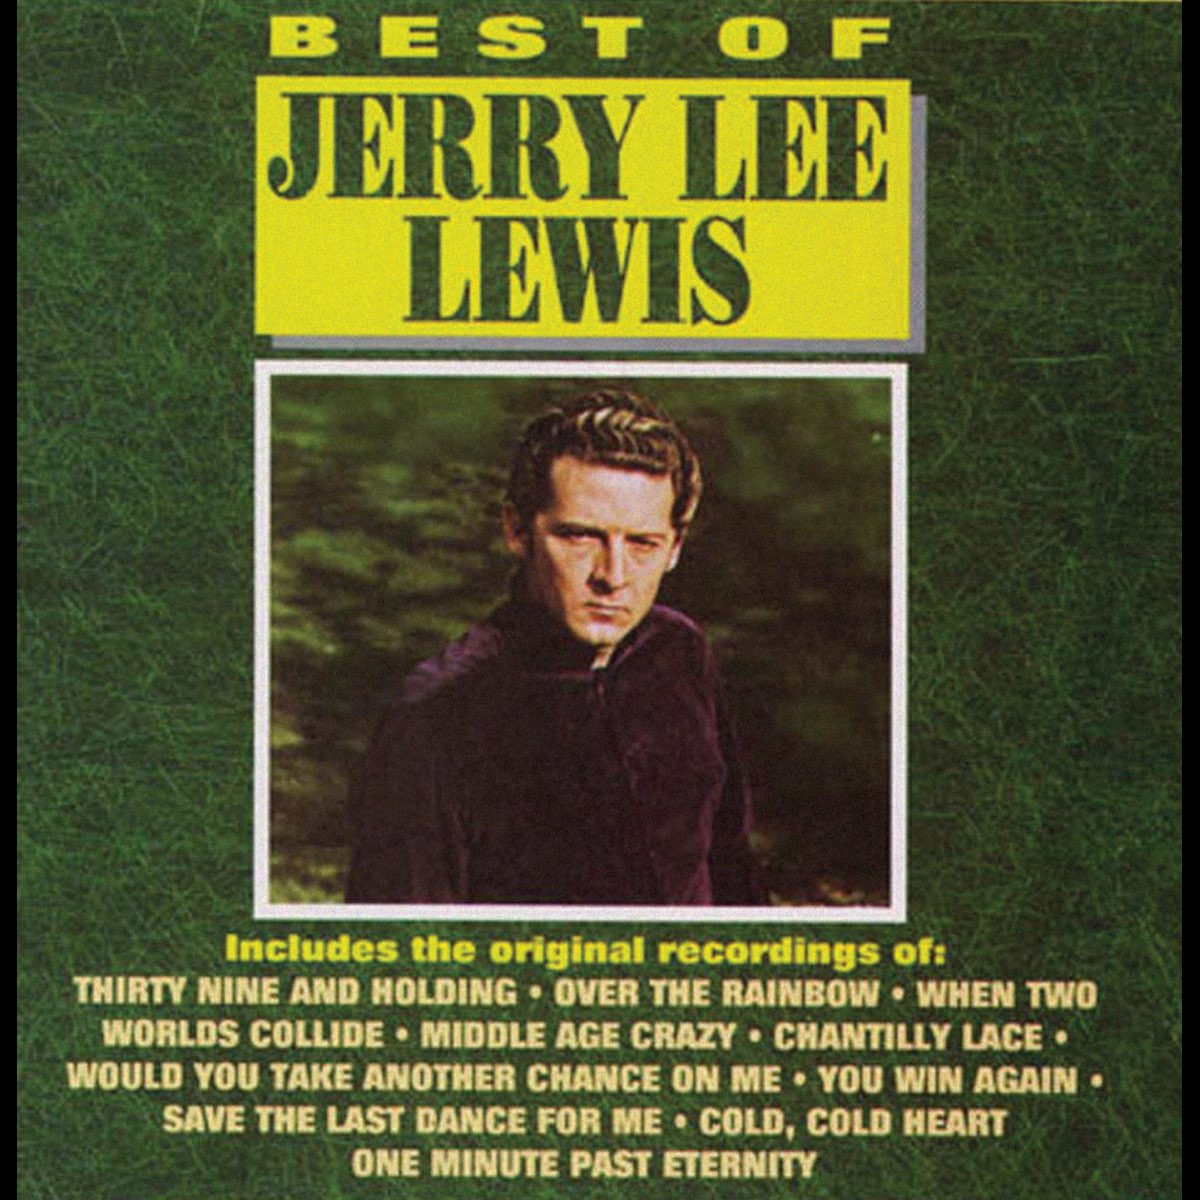 Best of Jerry Lee Lewis by Jerry Lee Lewis on Apple Music